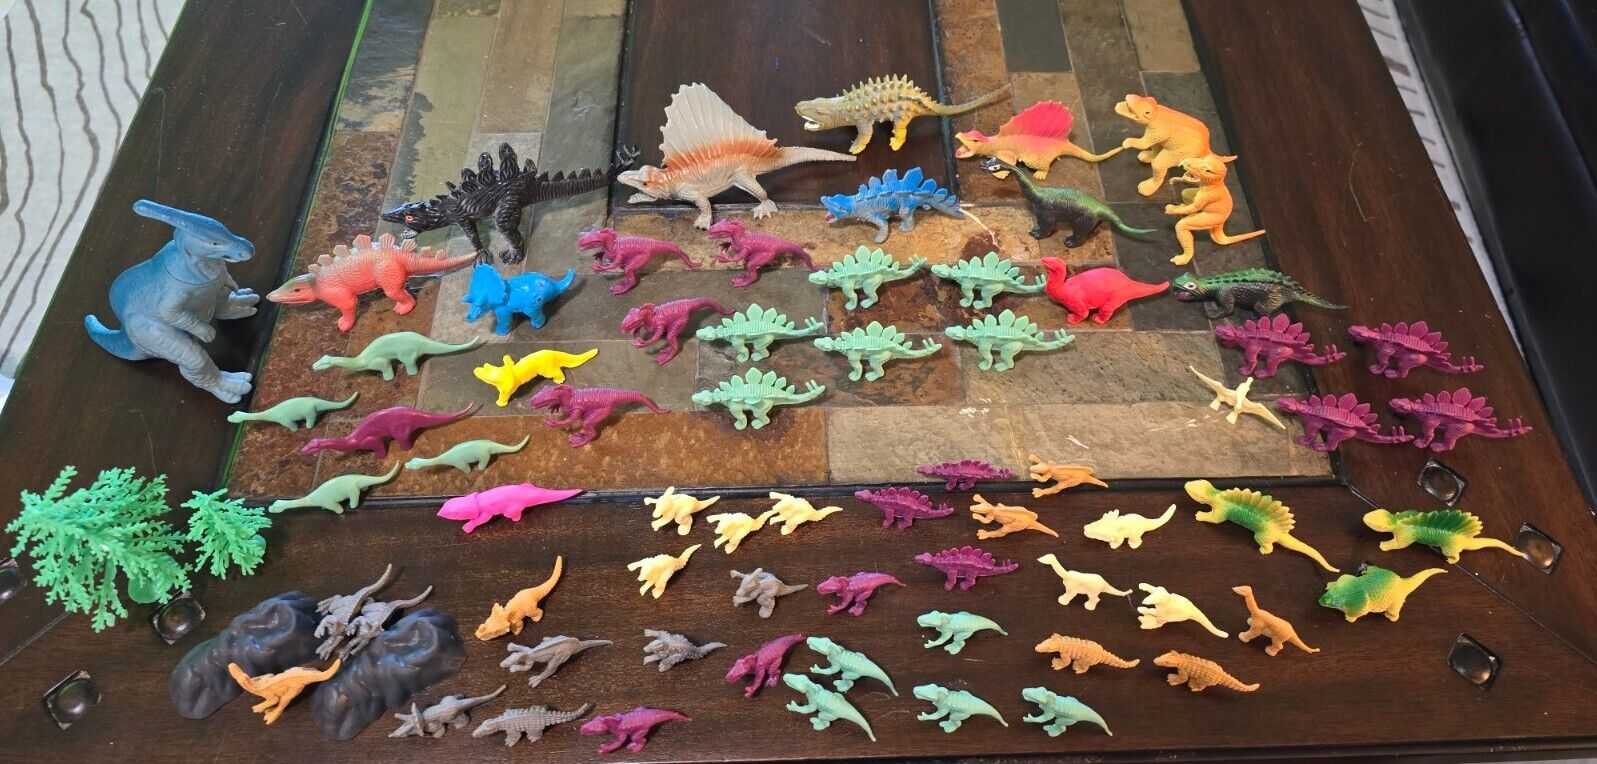 Toy Dinosaur Large Mixed Lot of 72 Pieces Various Sizes Some Vintage 